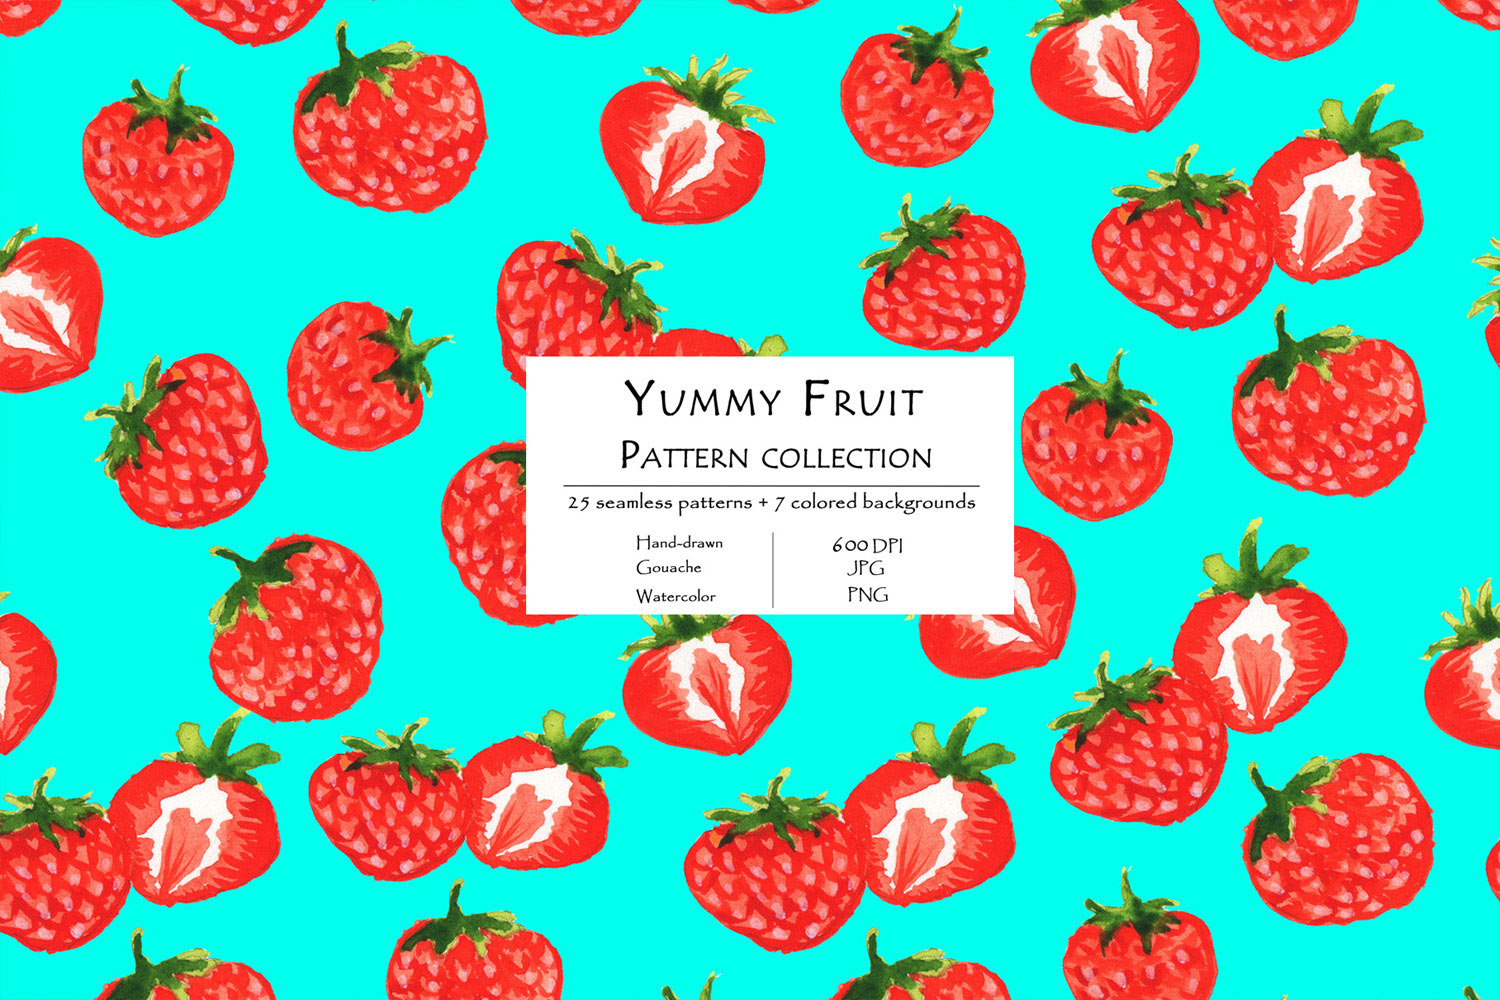 Yummy Fruit Pattern Collection With 25 Seamless Patterns And 7 Backgrounds Strawberries Example.